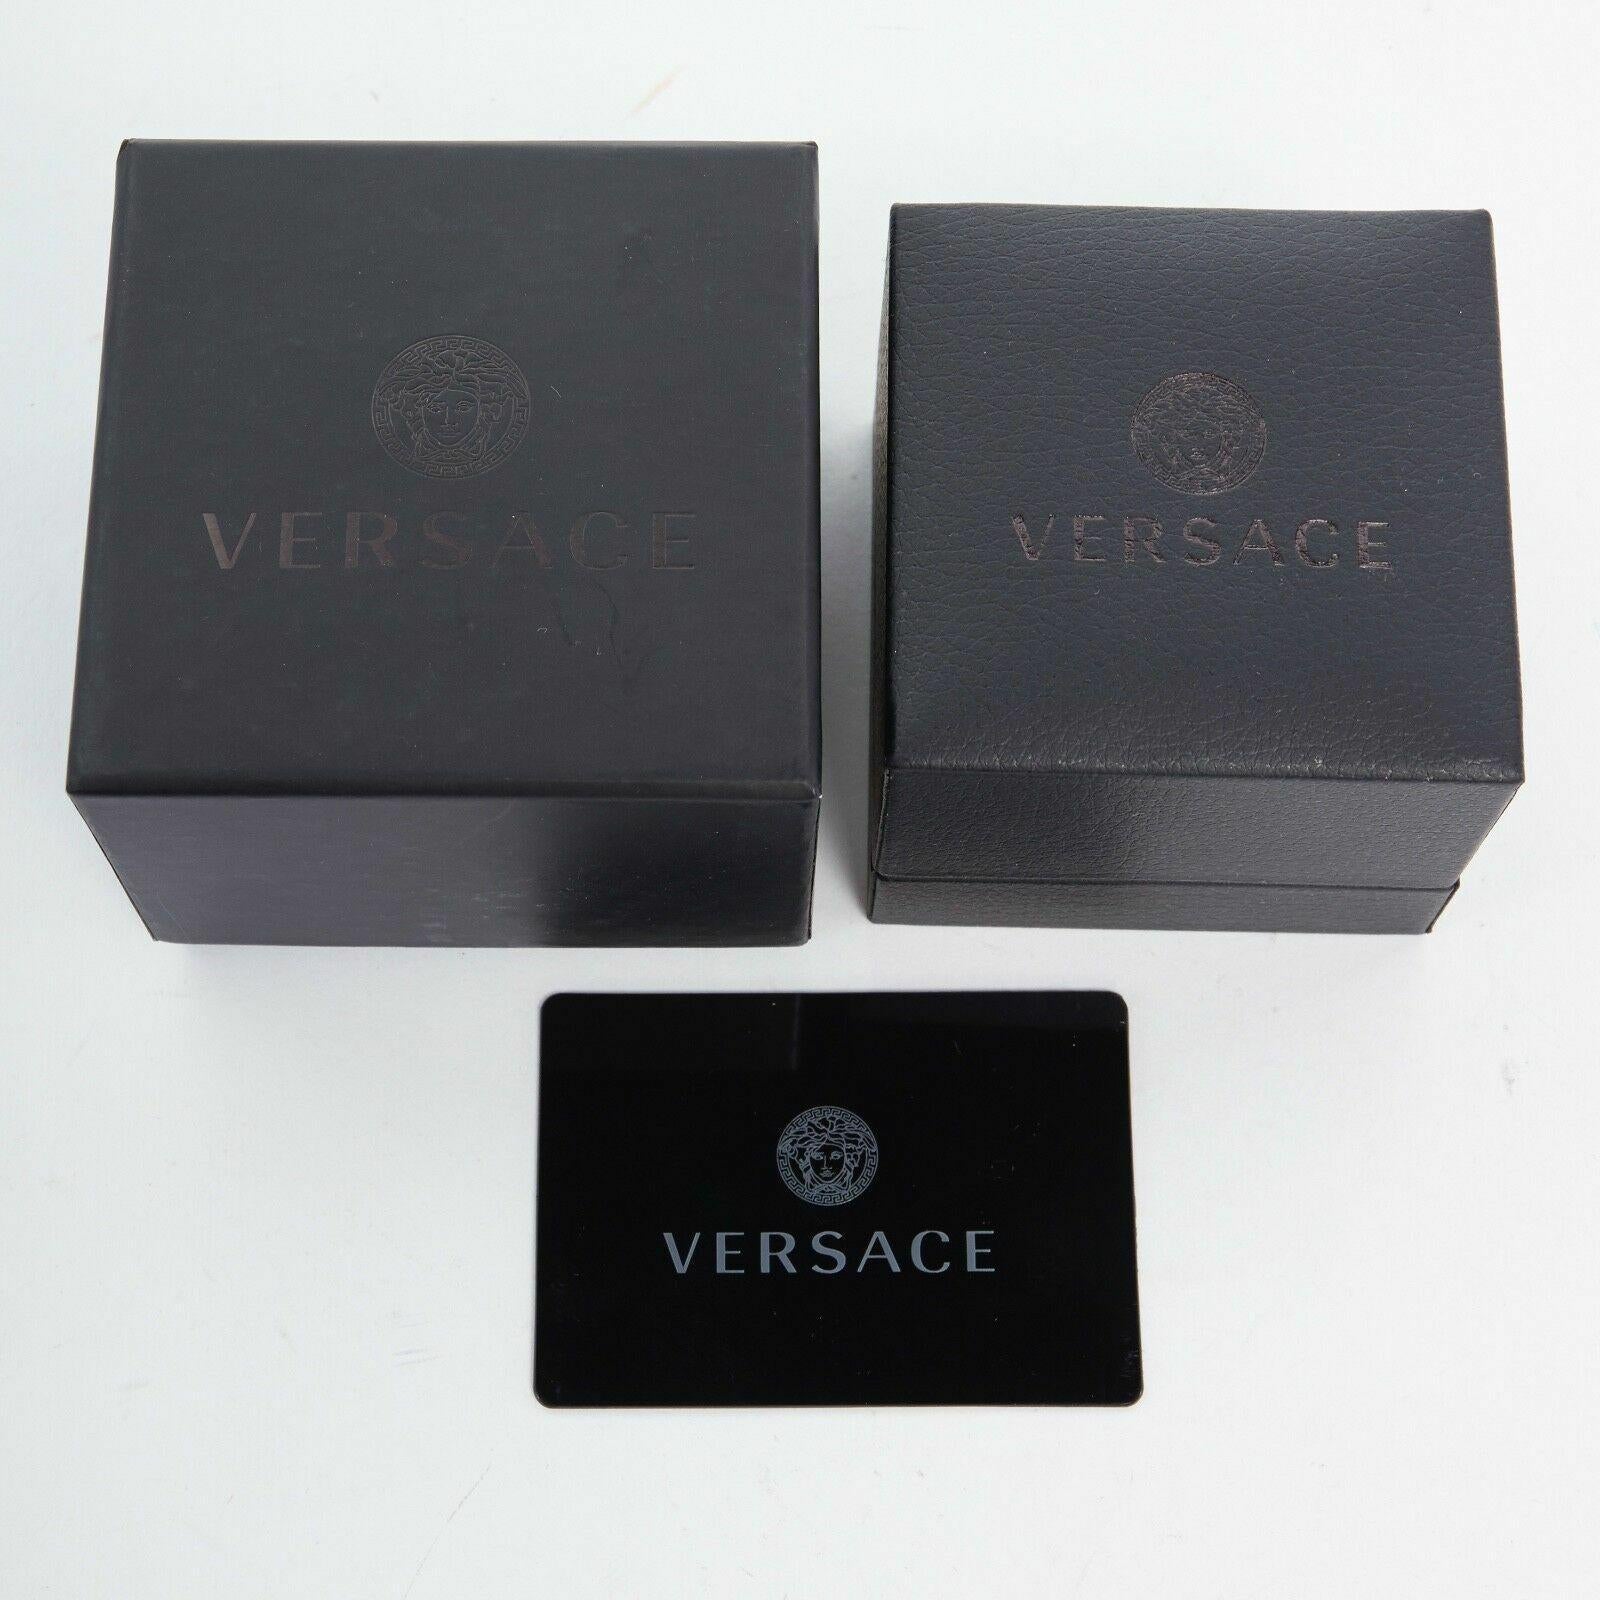 new VERSACE Palazzo Medusa snake head gold plated large statement ring 10.25 2